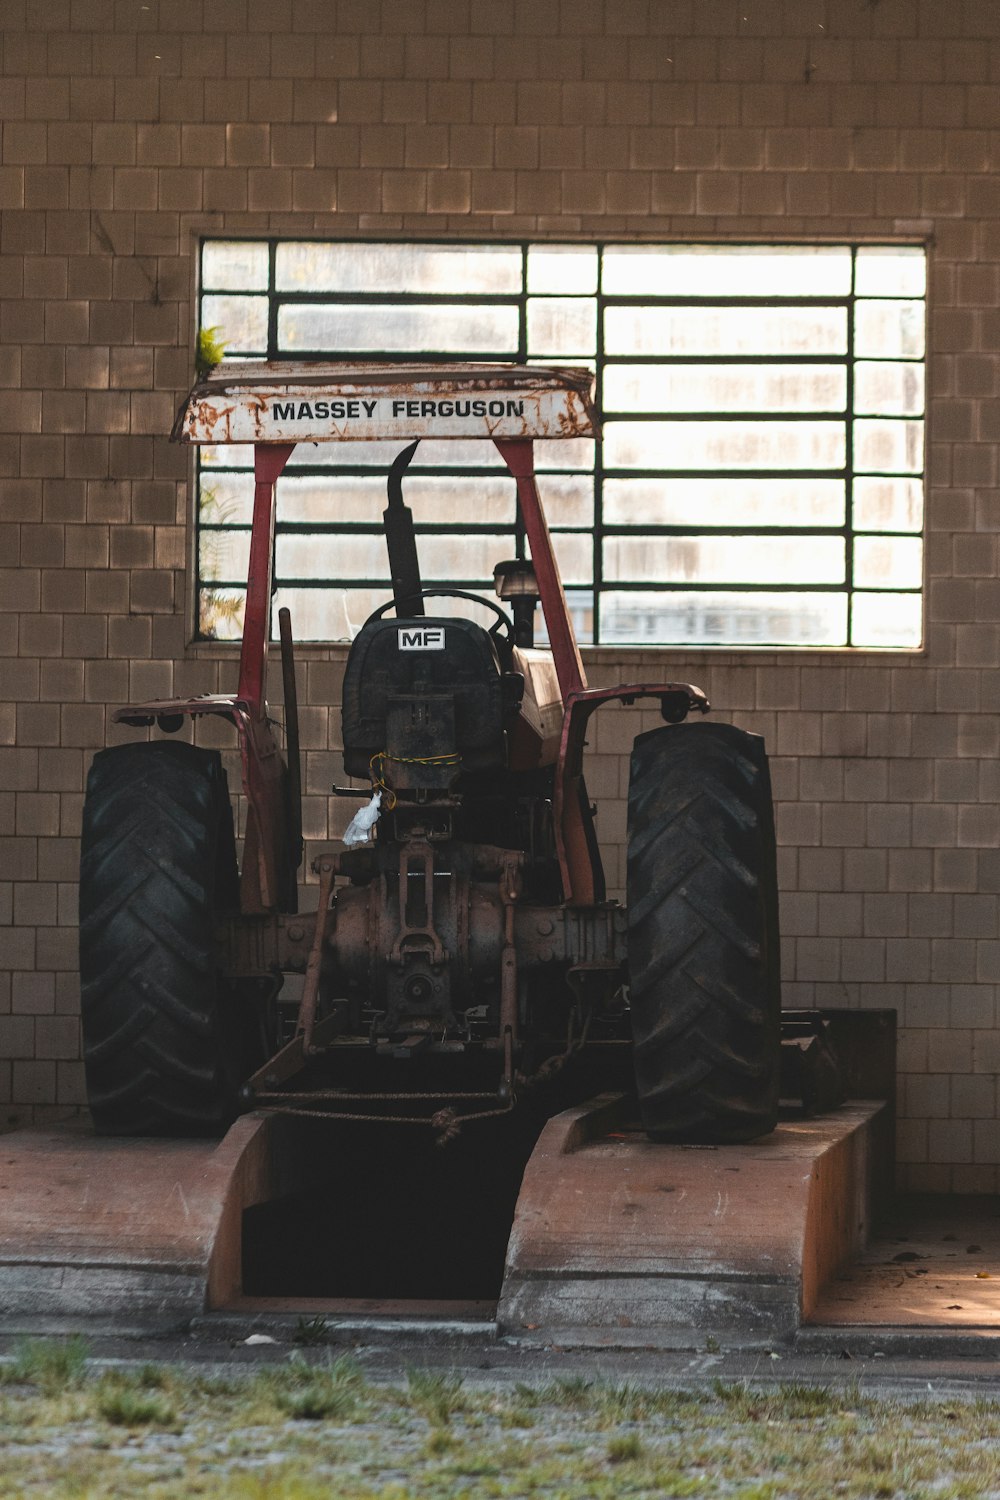 red and black tractor in front of white brick wall